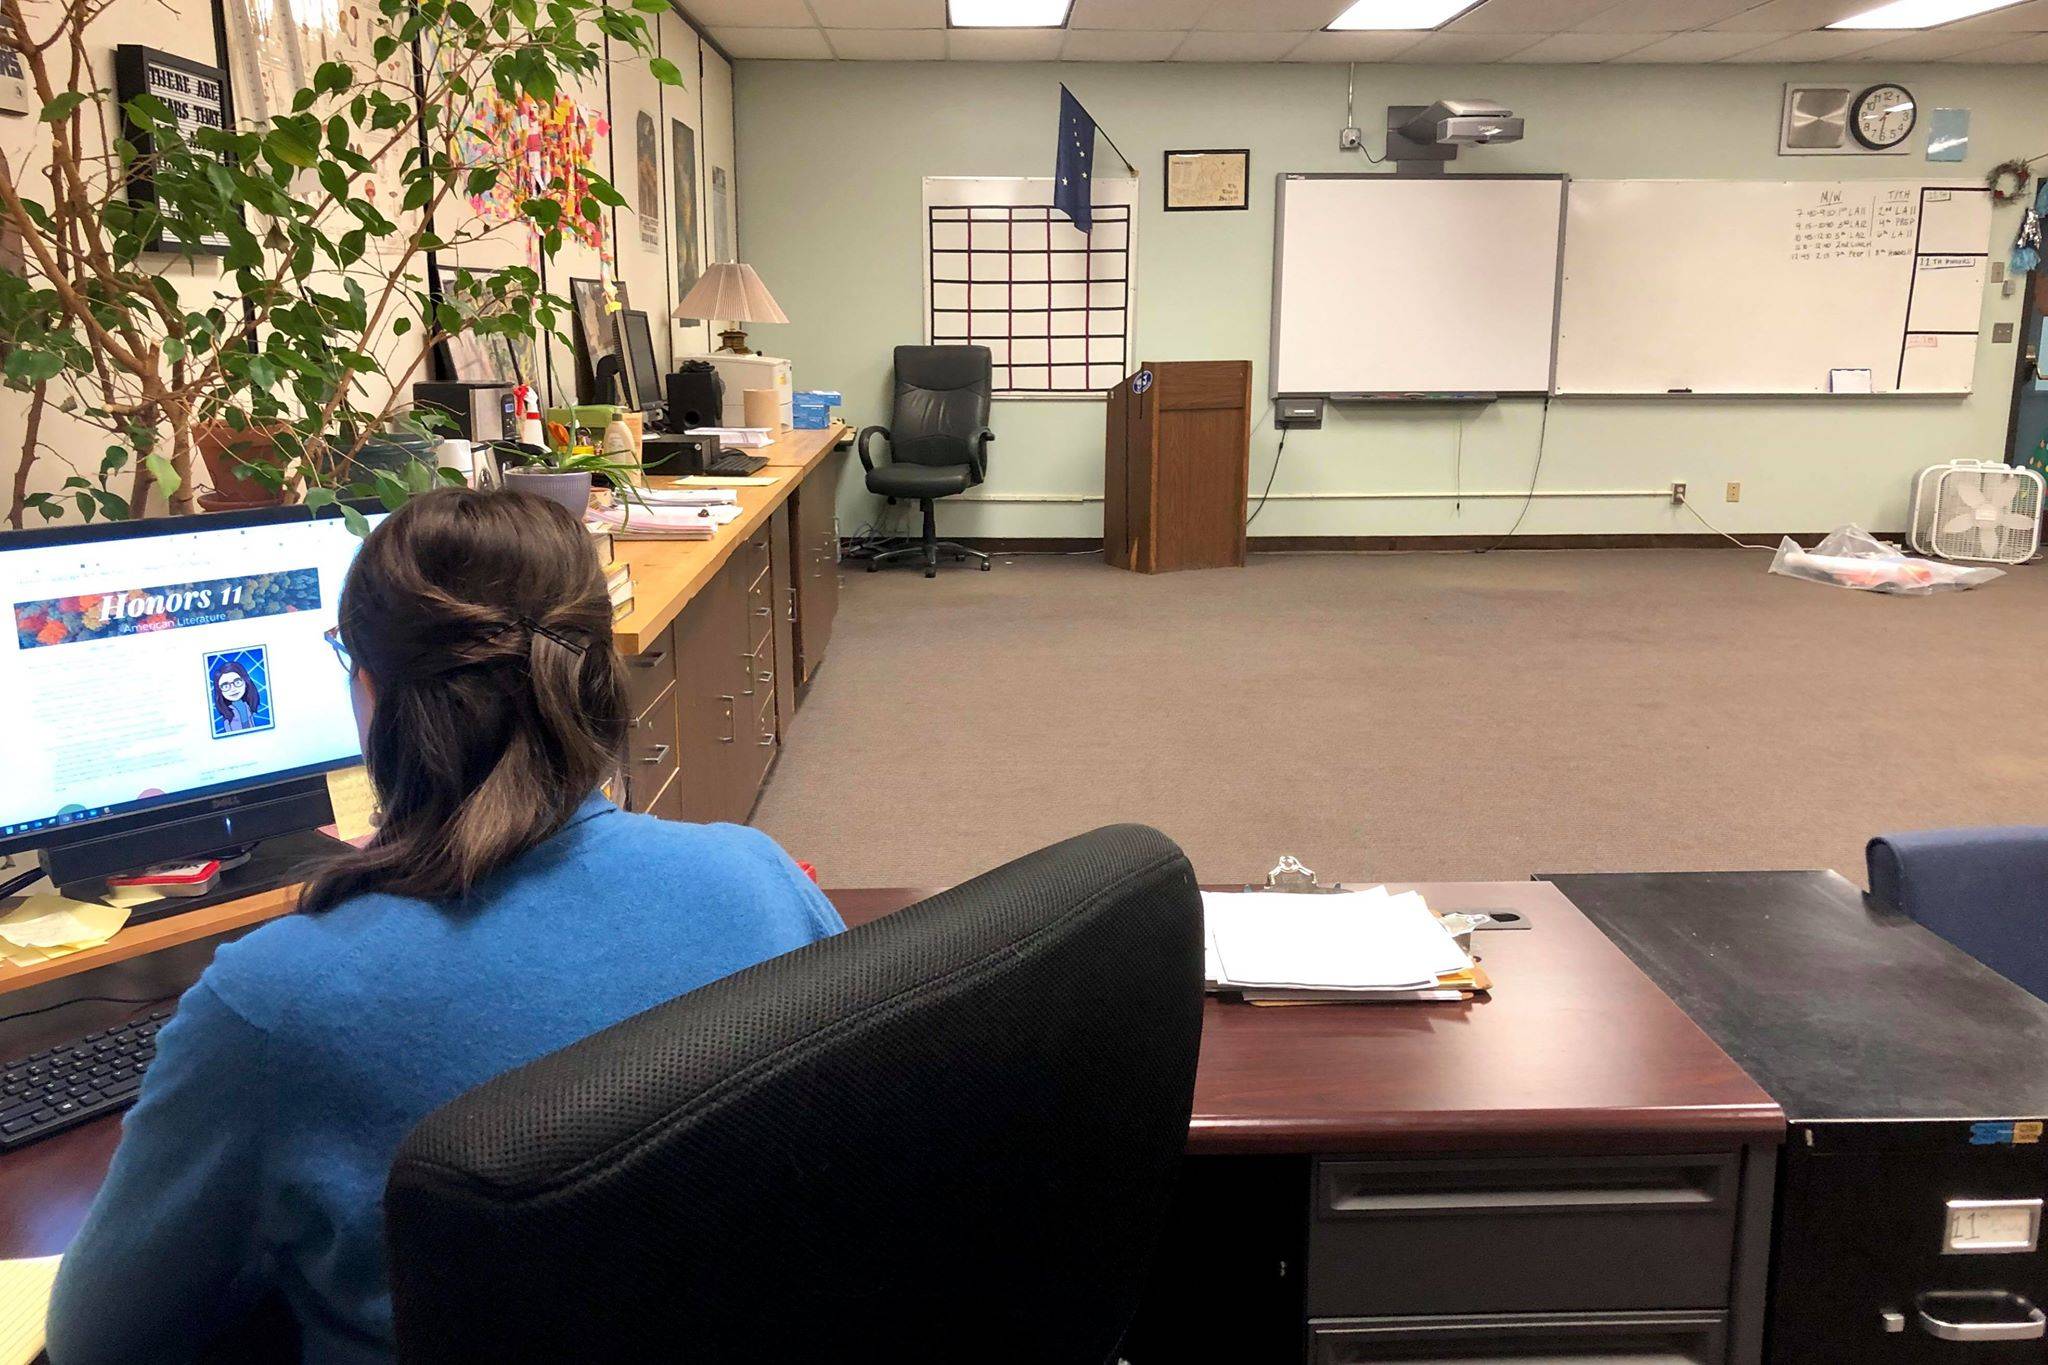 Soldotna High School English teacher Nicole Hewitt teaches her students remotely from her empty classroom at Soldotna High School on Monday, April 6, 2020 in Soldotna, Alaska. (Photo by Victoria Petersen/Peninsula Clarion)